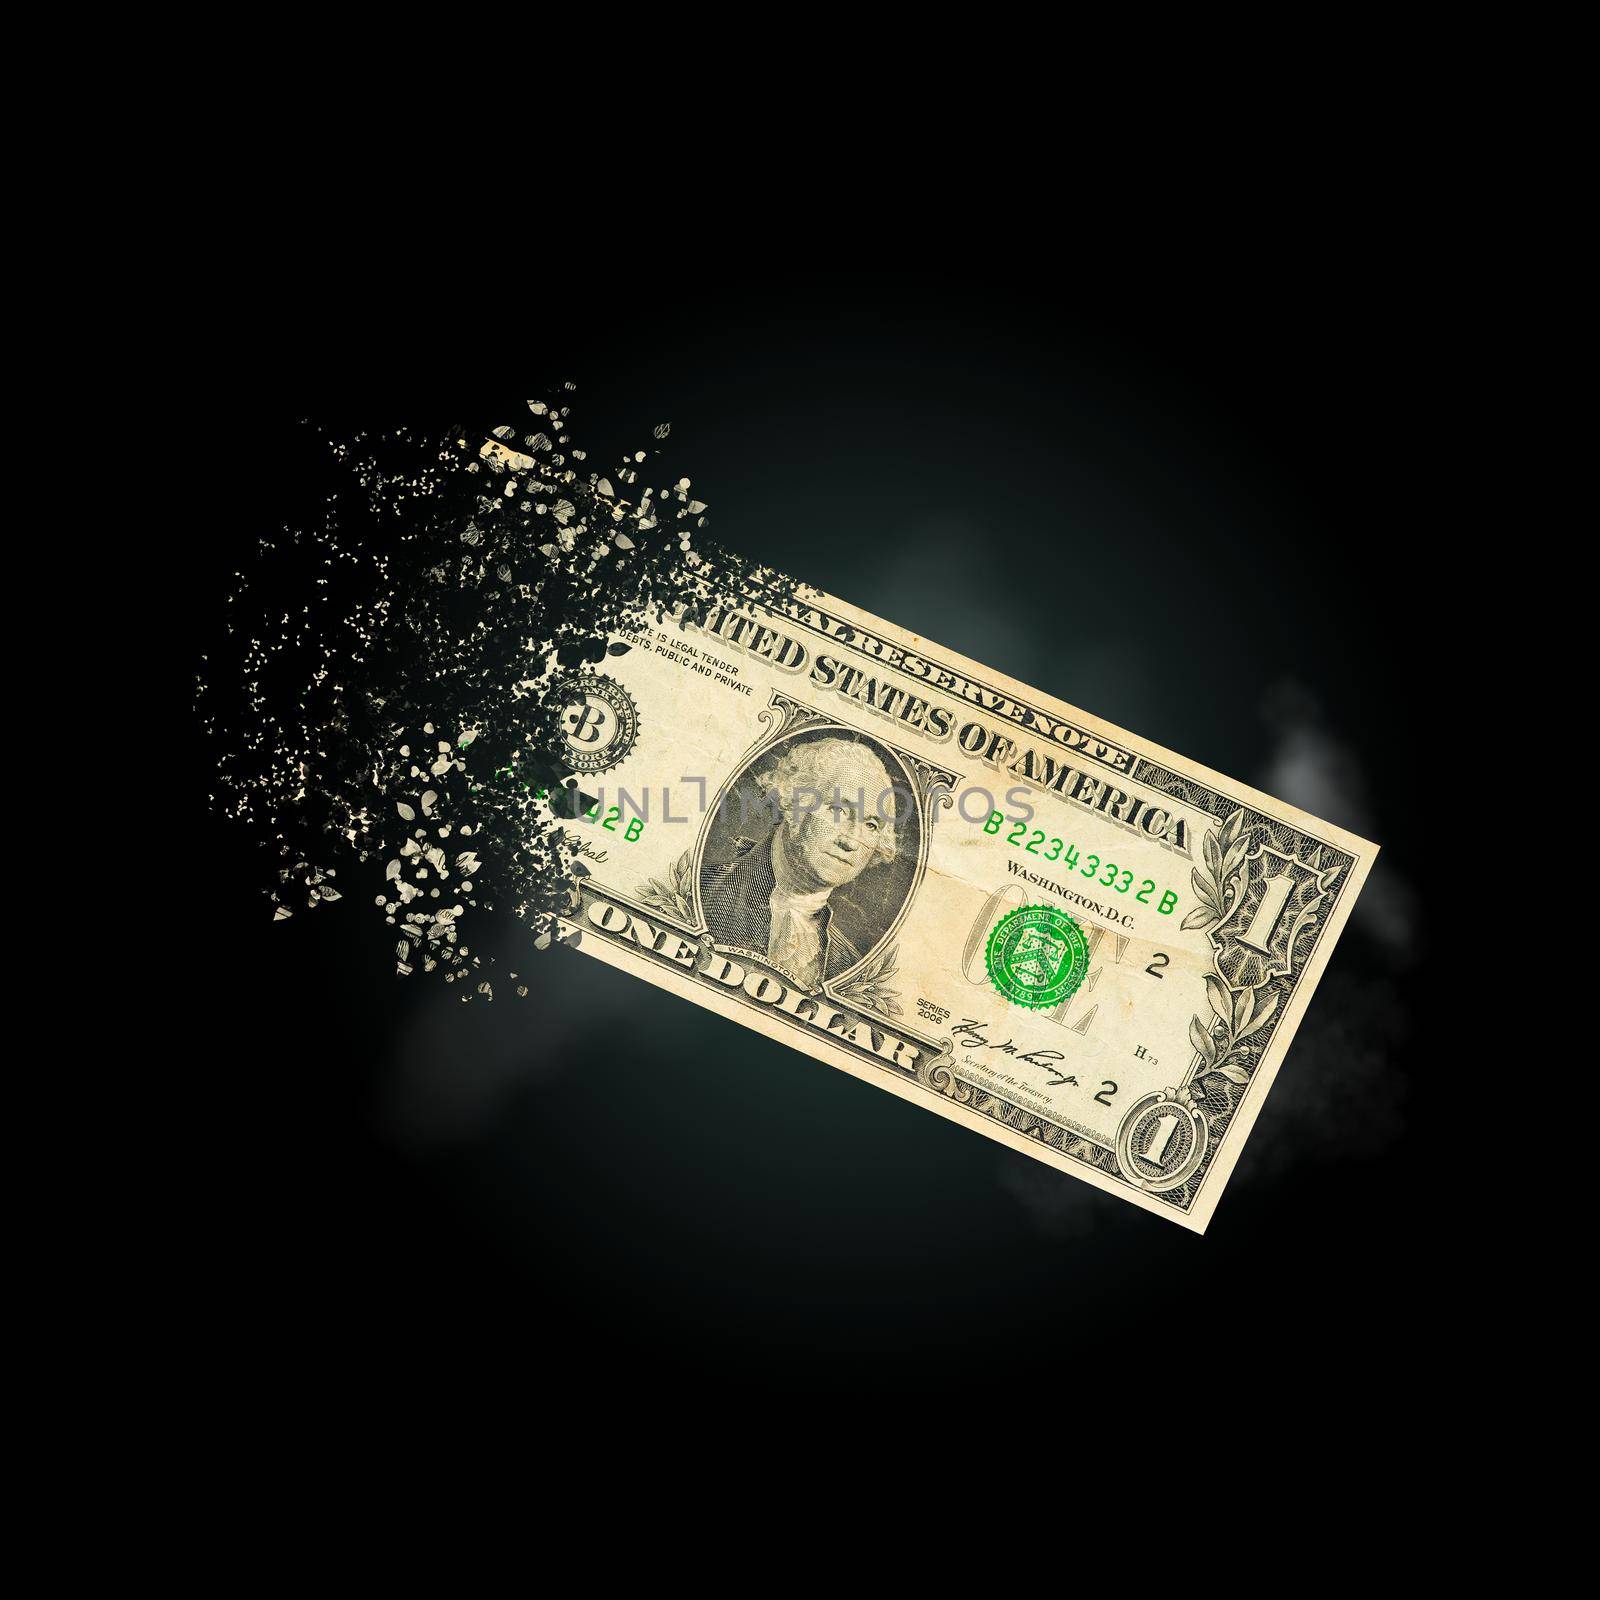 one dollar bills scattered in the air. money inflation concept. the disappearance of banknotes, hyperinflation. financial crash, dollar banknotes, high living costs.